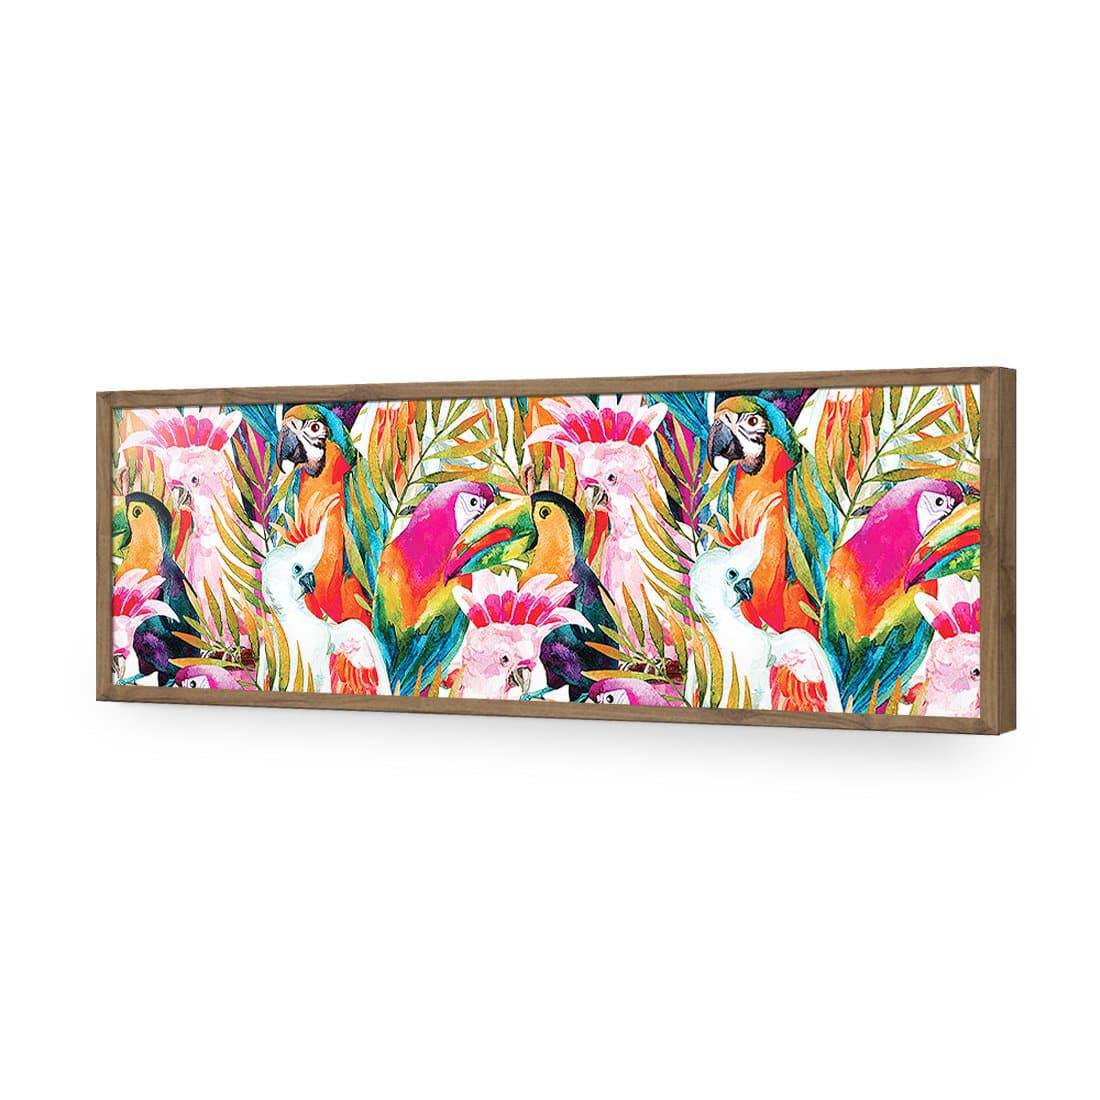 Parrots & Palms, Long-Acrylic-Wall Art Design-Without Border-Acrylic - Natural Frame-60x20cm-Wall Art Designs